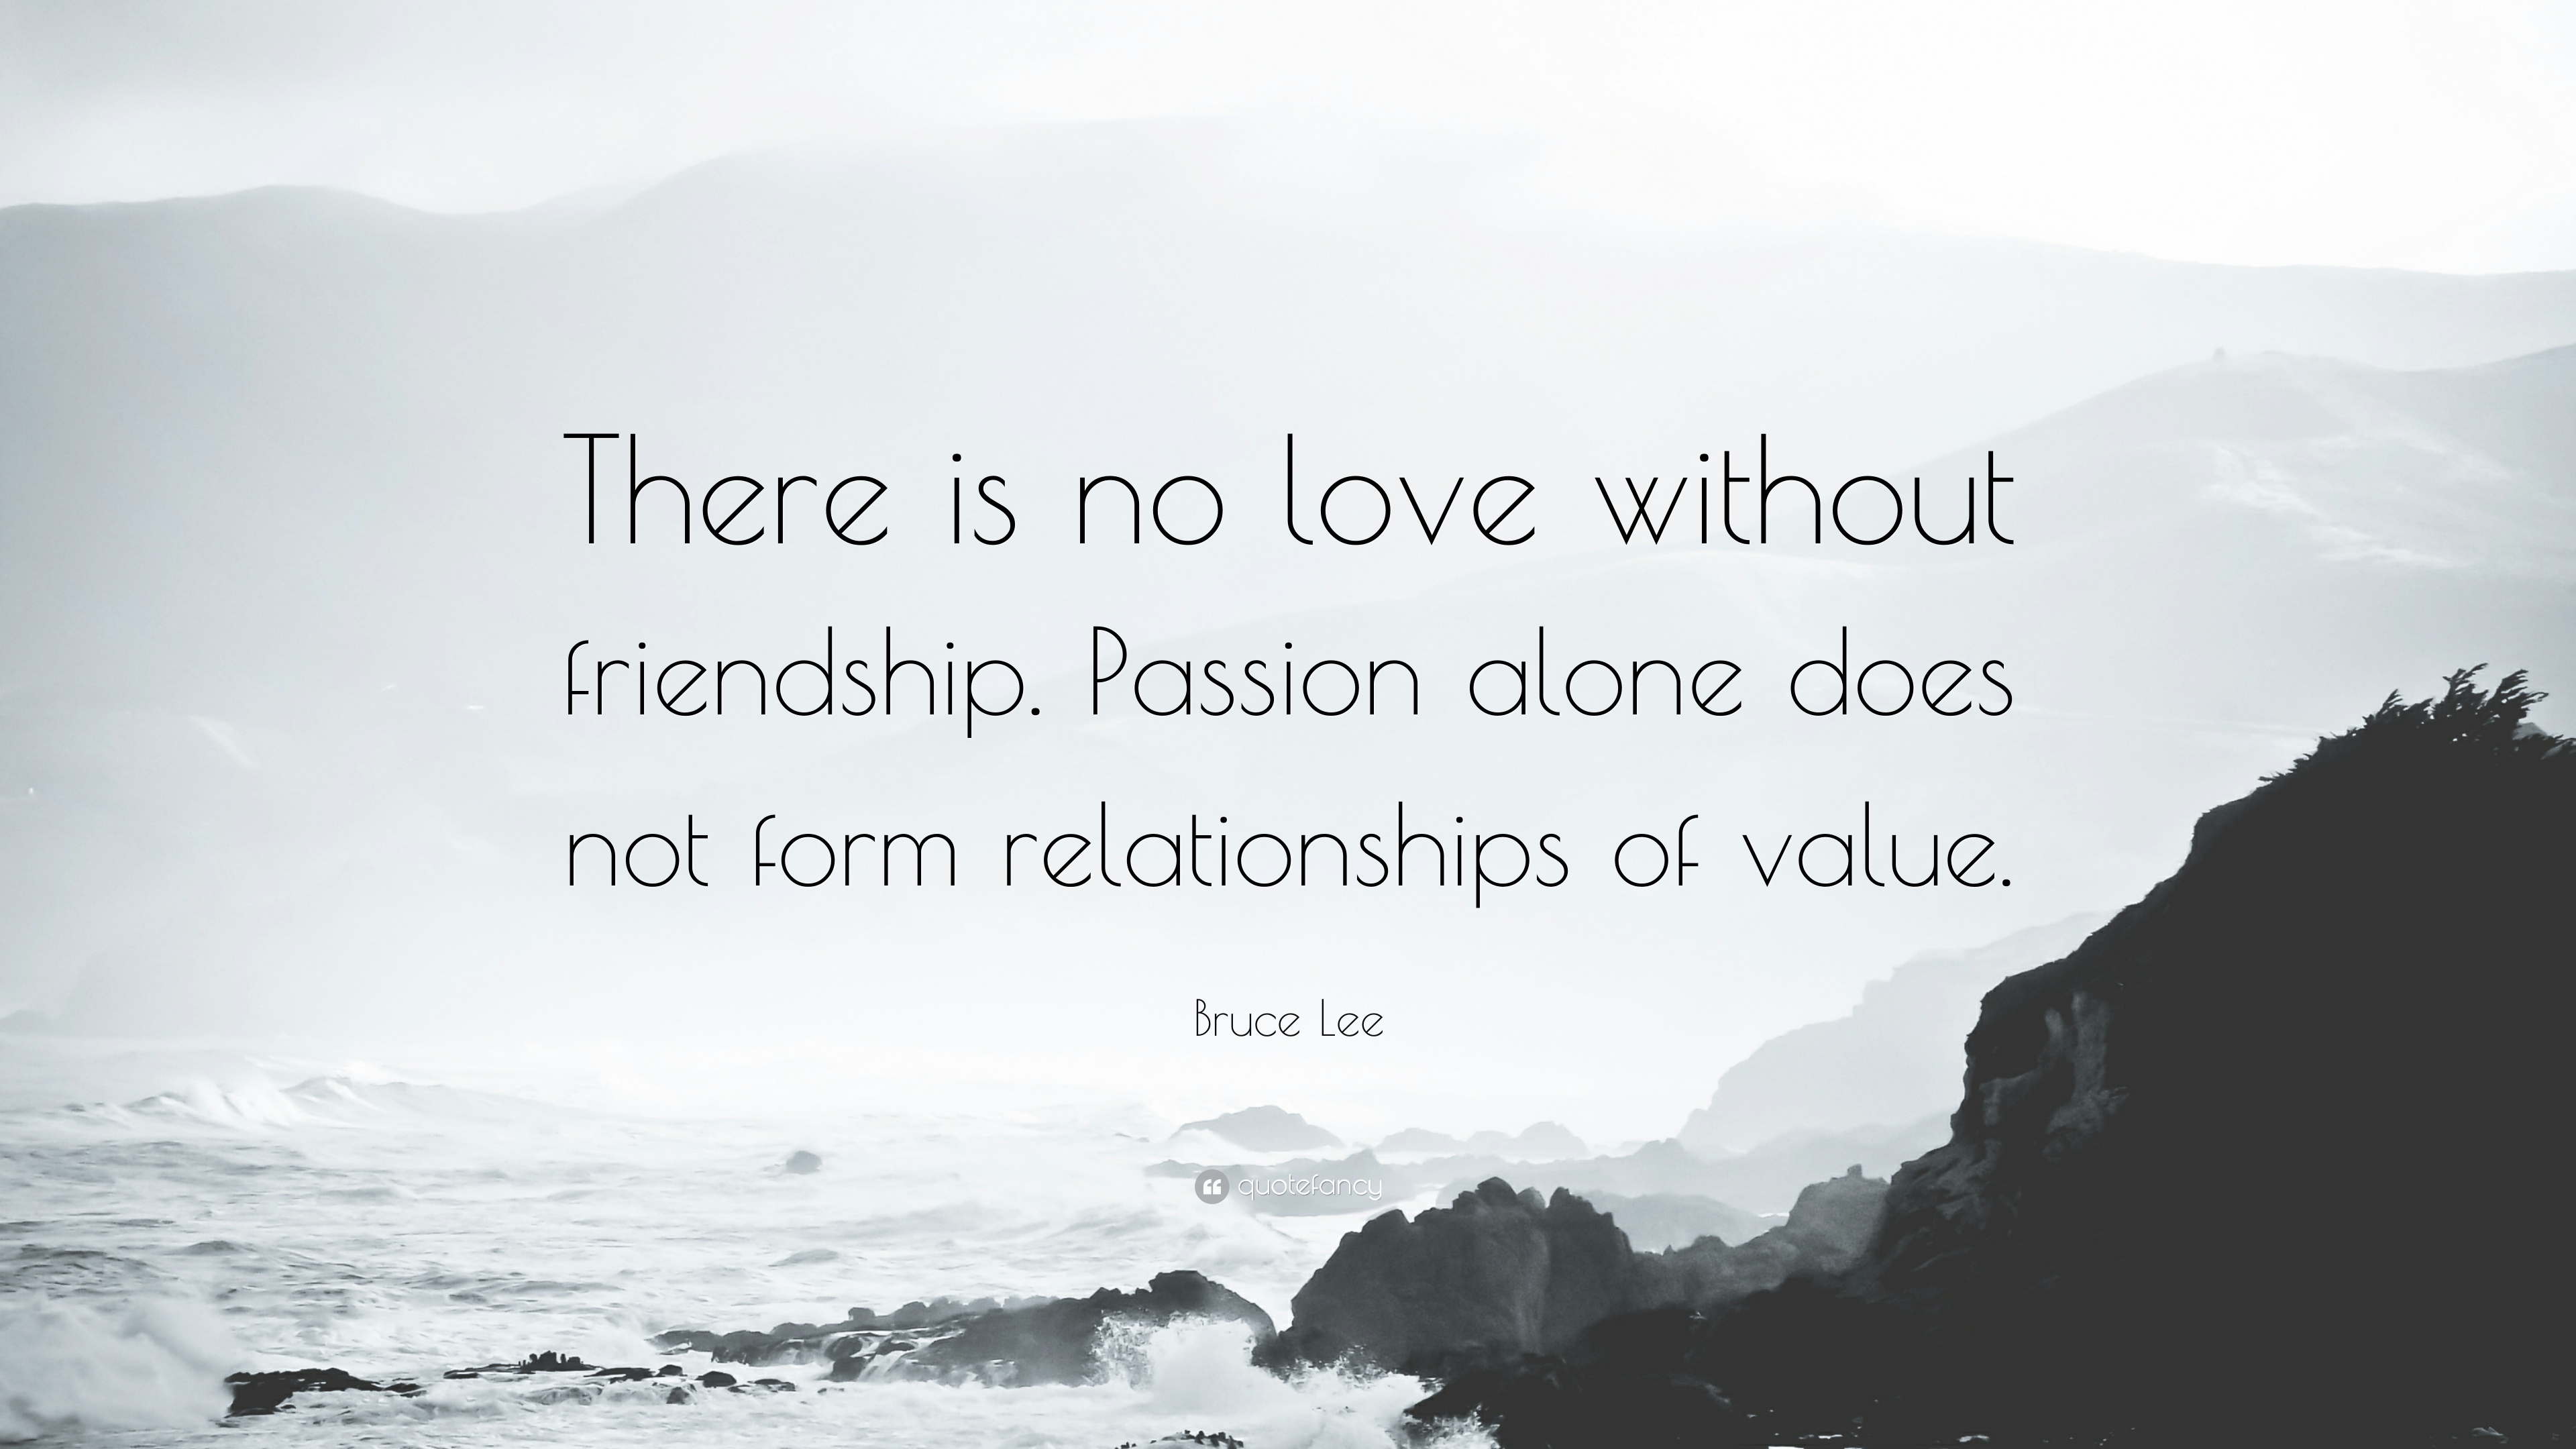 Bruce Lee Quote: “There is no love without friendship. Passion alone